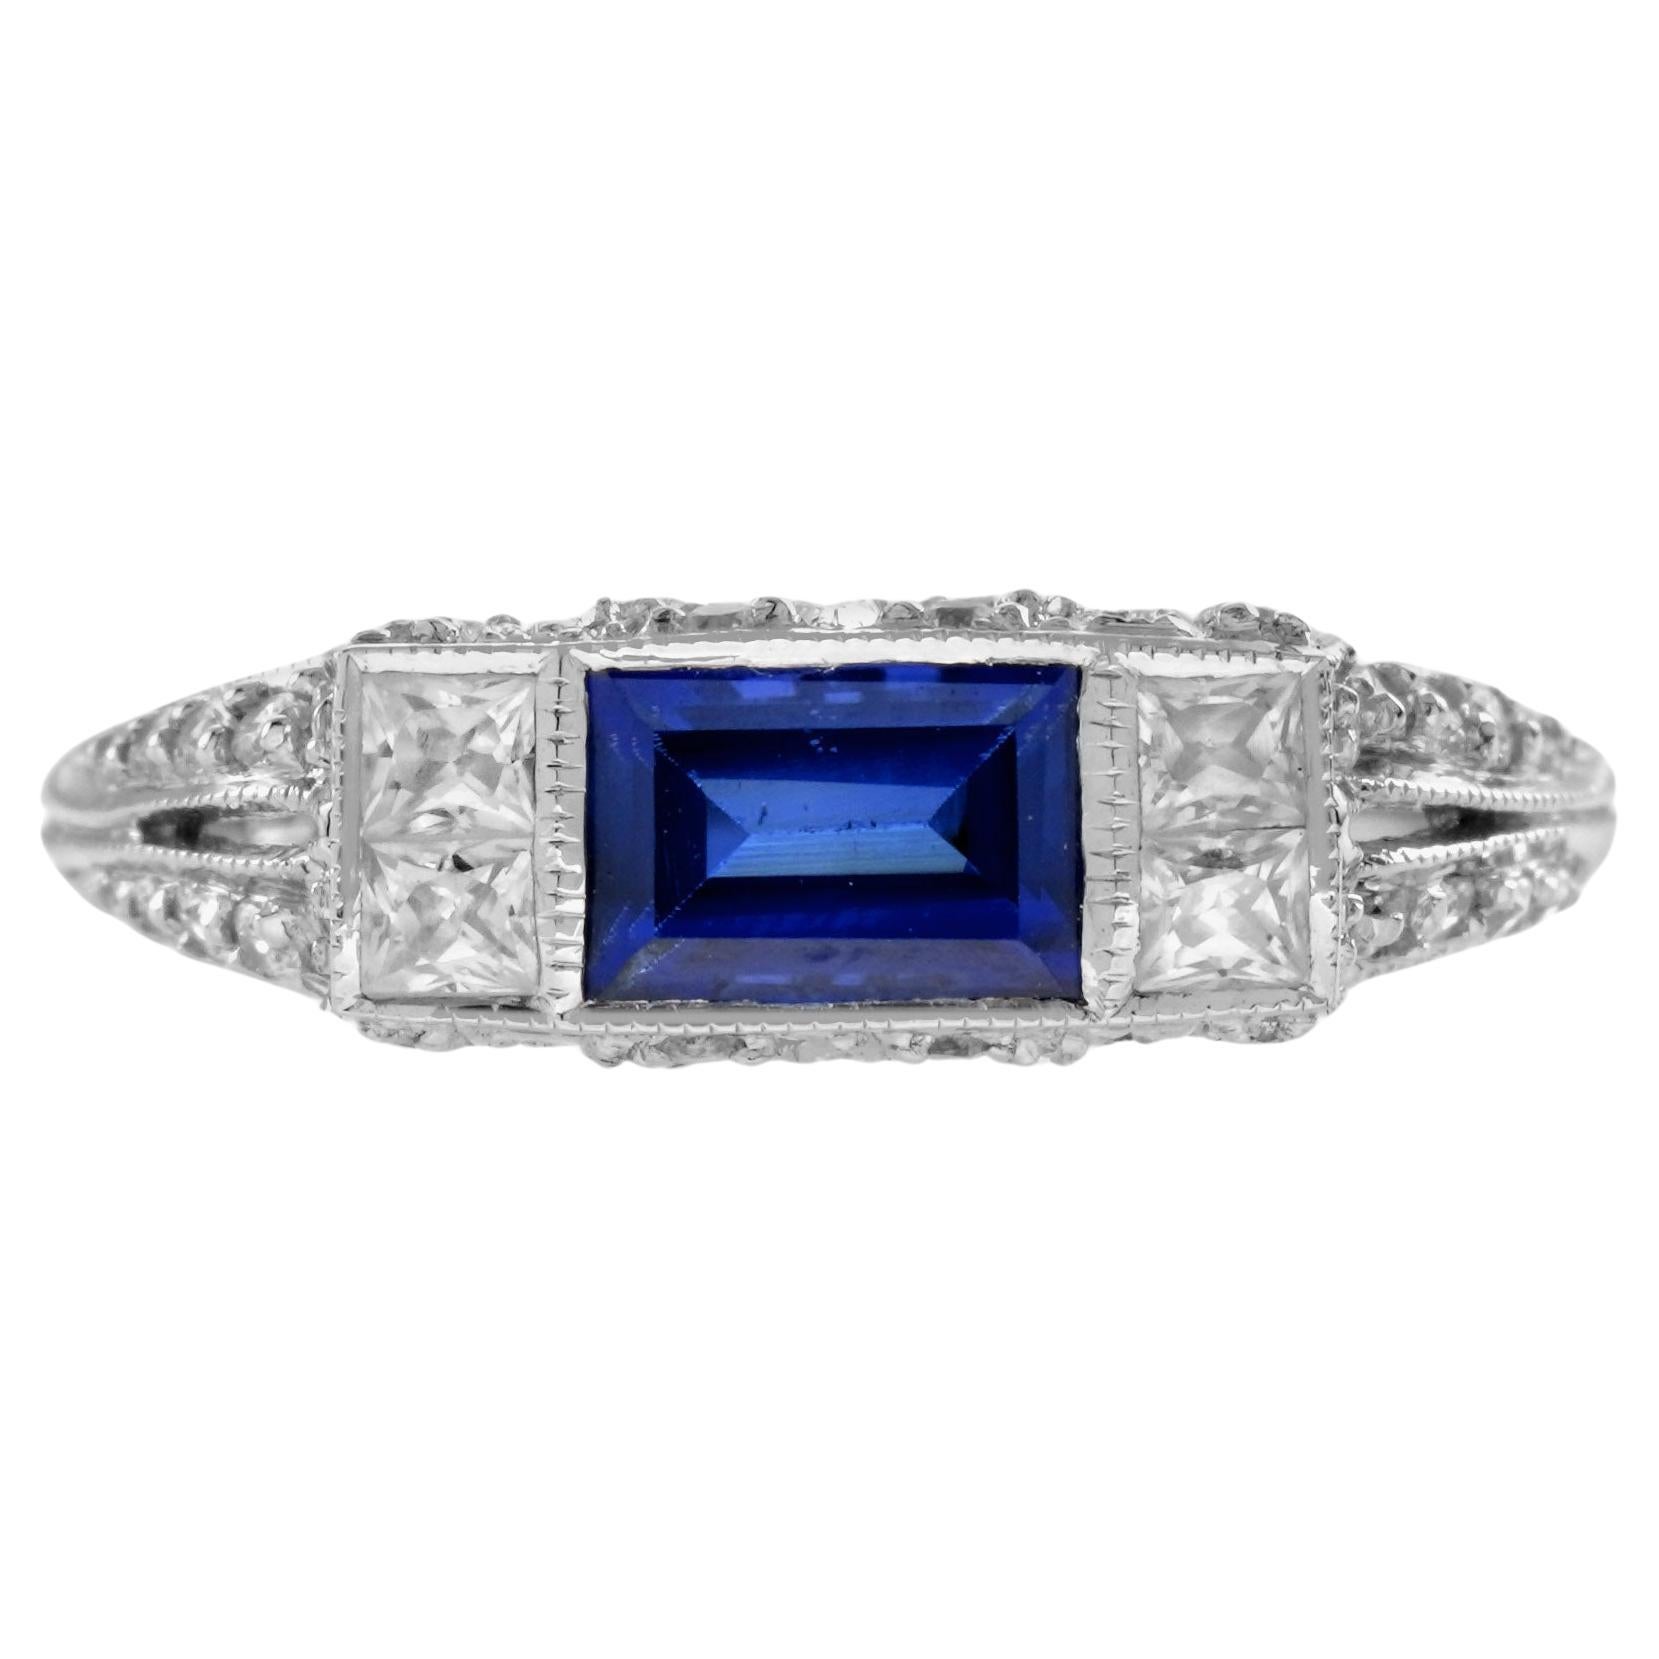 For Sale:  Blue Sapphire and Diamond Art Deco Style Solitaire Ring in 14K White Gold